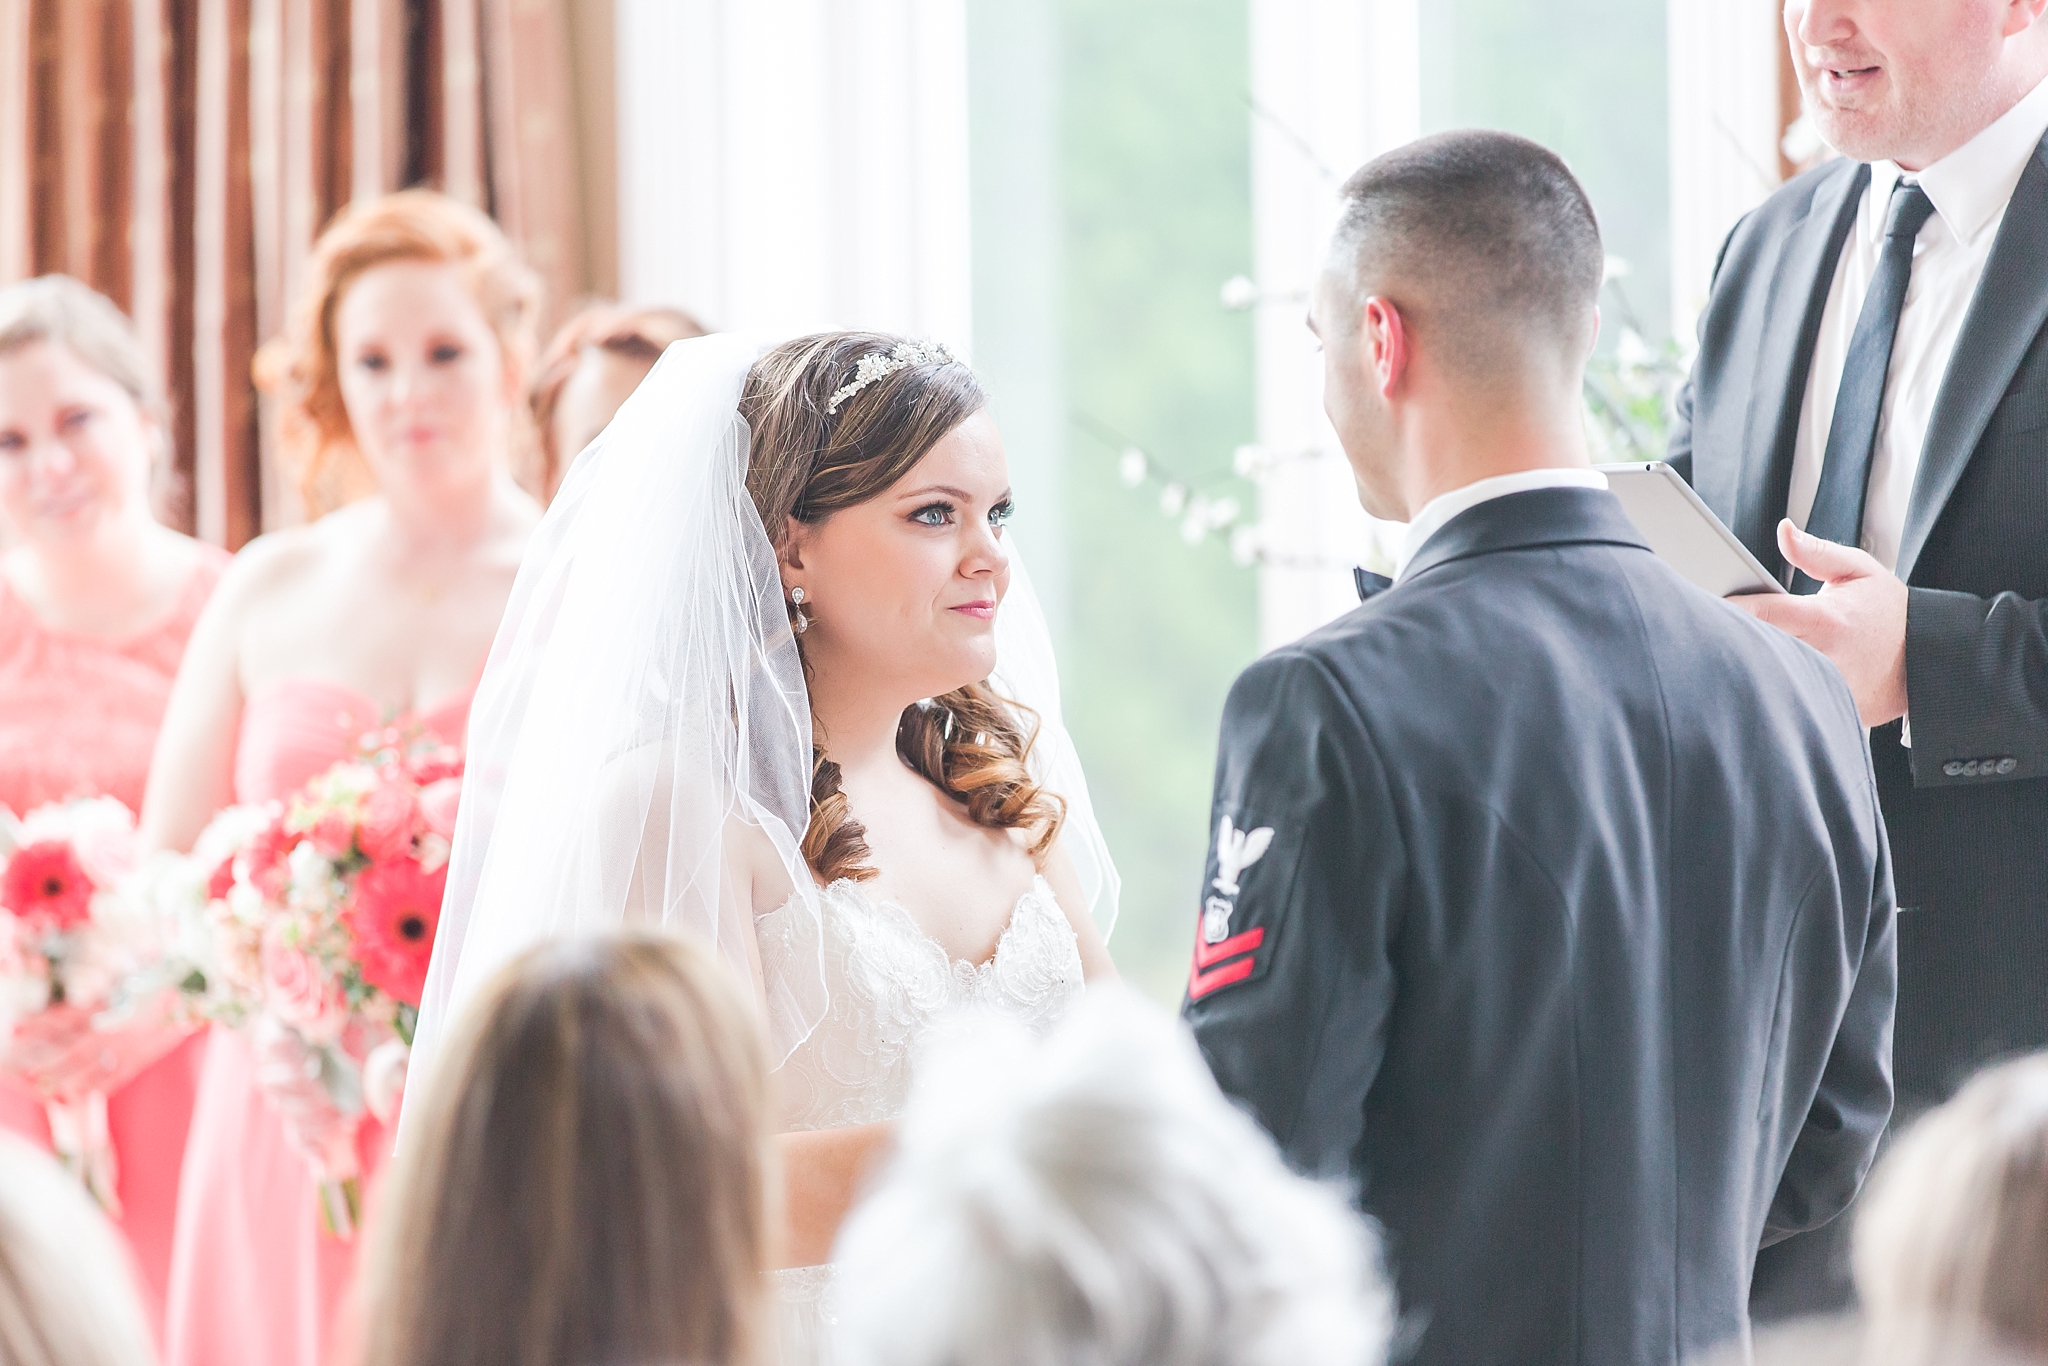 romantic-artful-candid-wedding-photos-in-st-clair-shores-at-the-white-house-wedding-chapel-by-courtney-carolyn-photography_0029.jpg